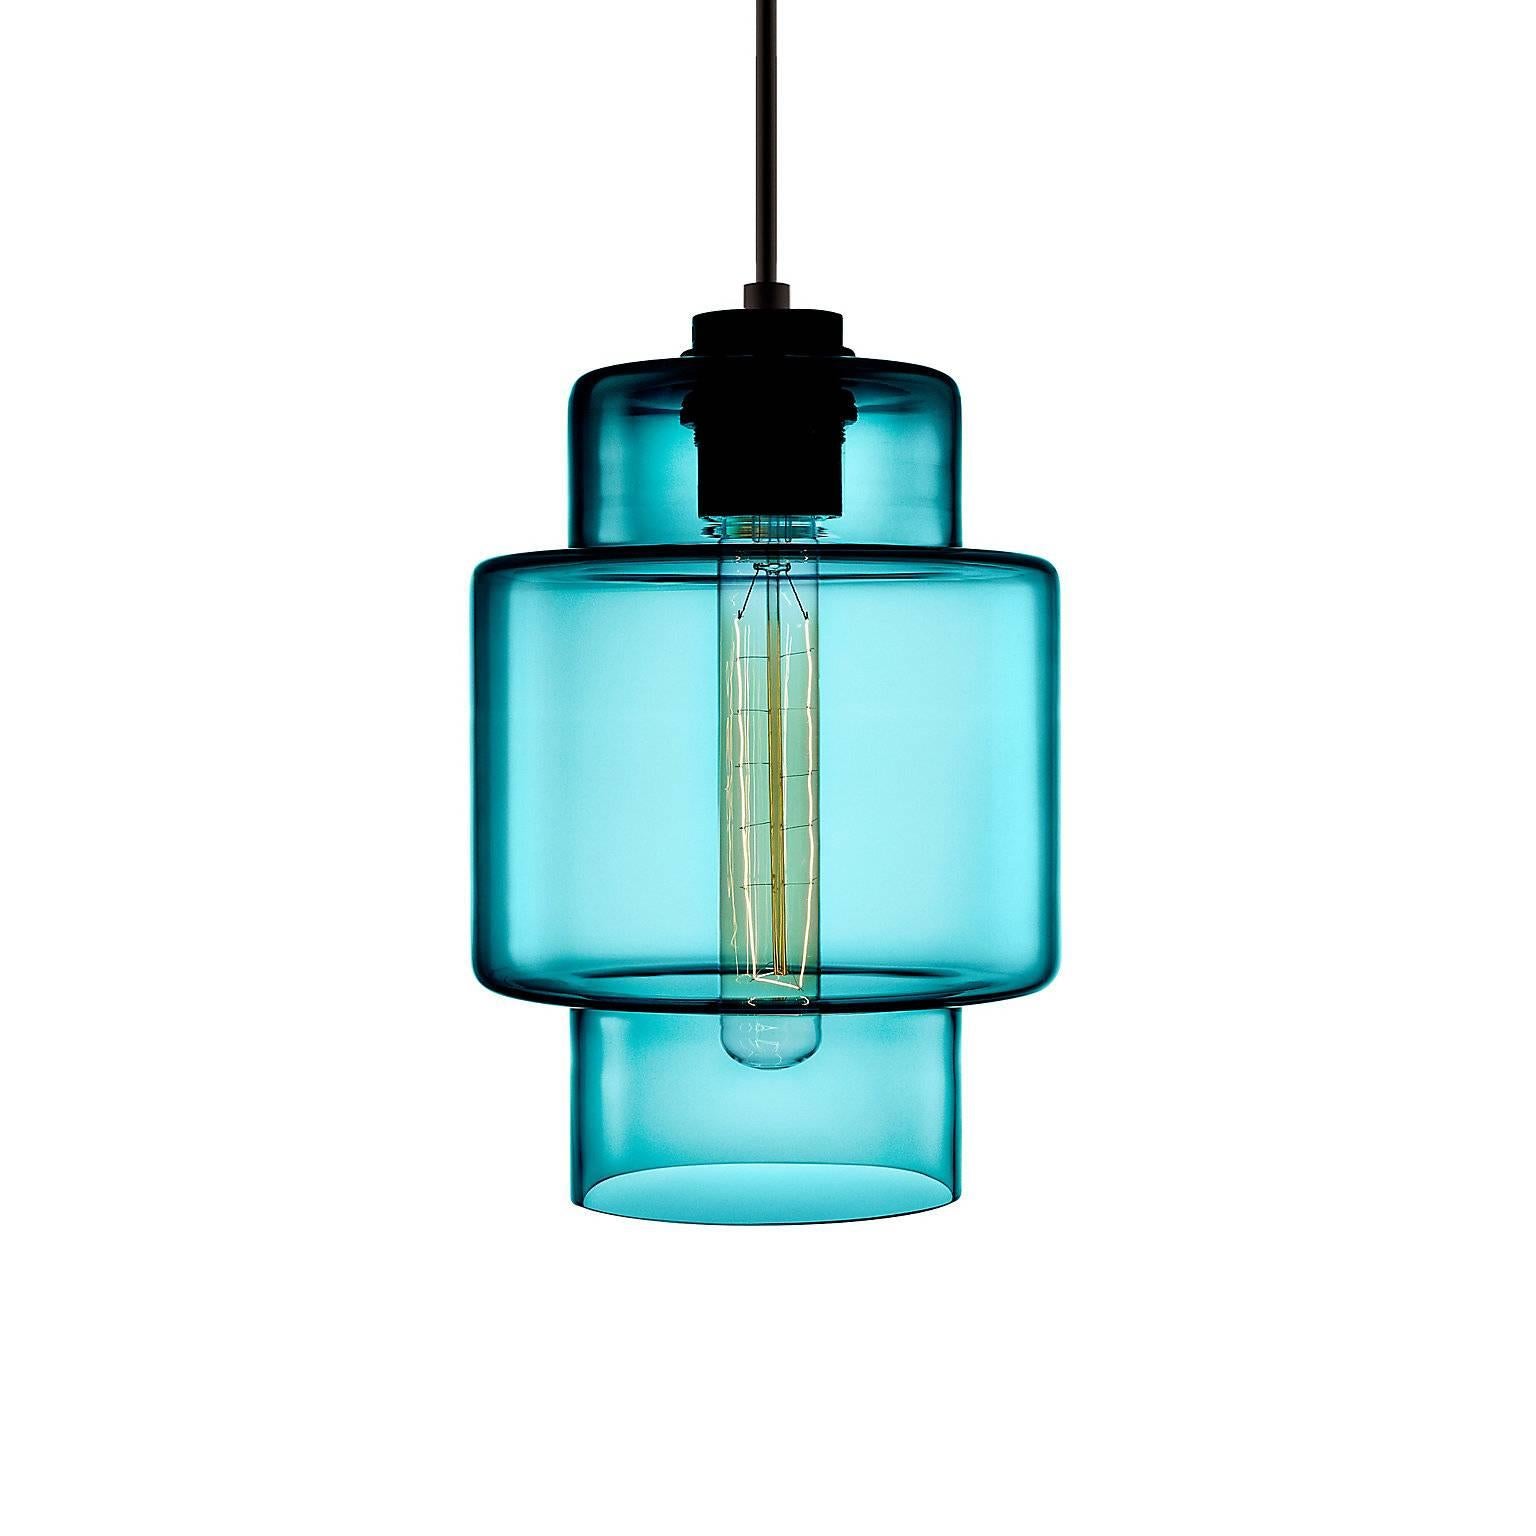 Axia Rose Handblown Modern Glass Pendant Light, Made in the USA In Excellent Condition For Sale In Beacon, NY